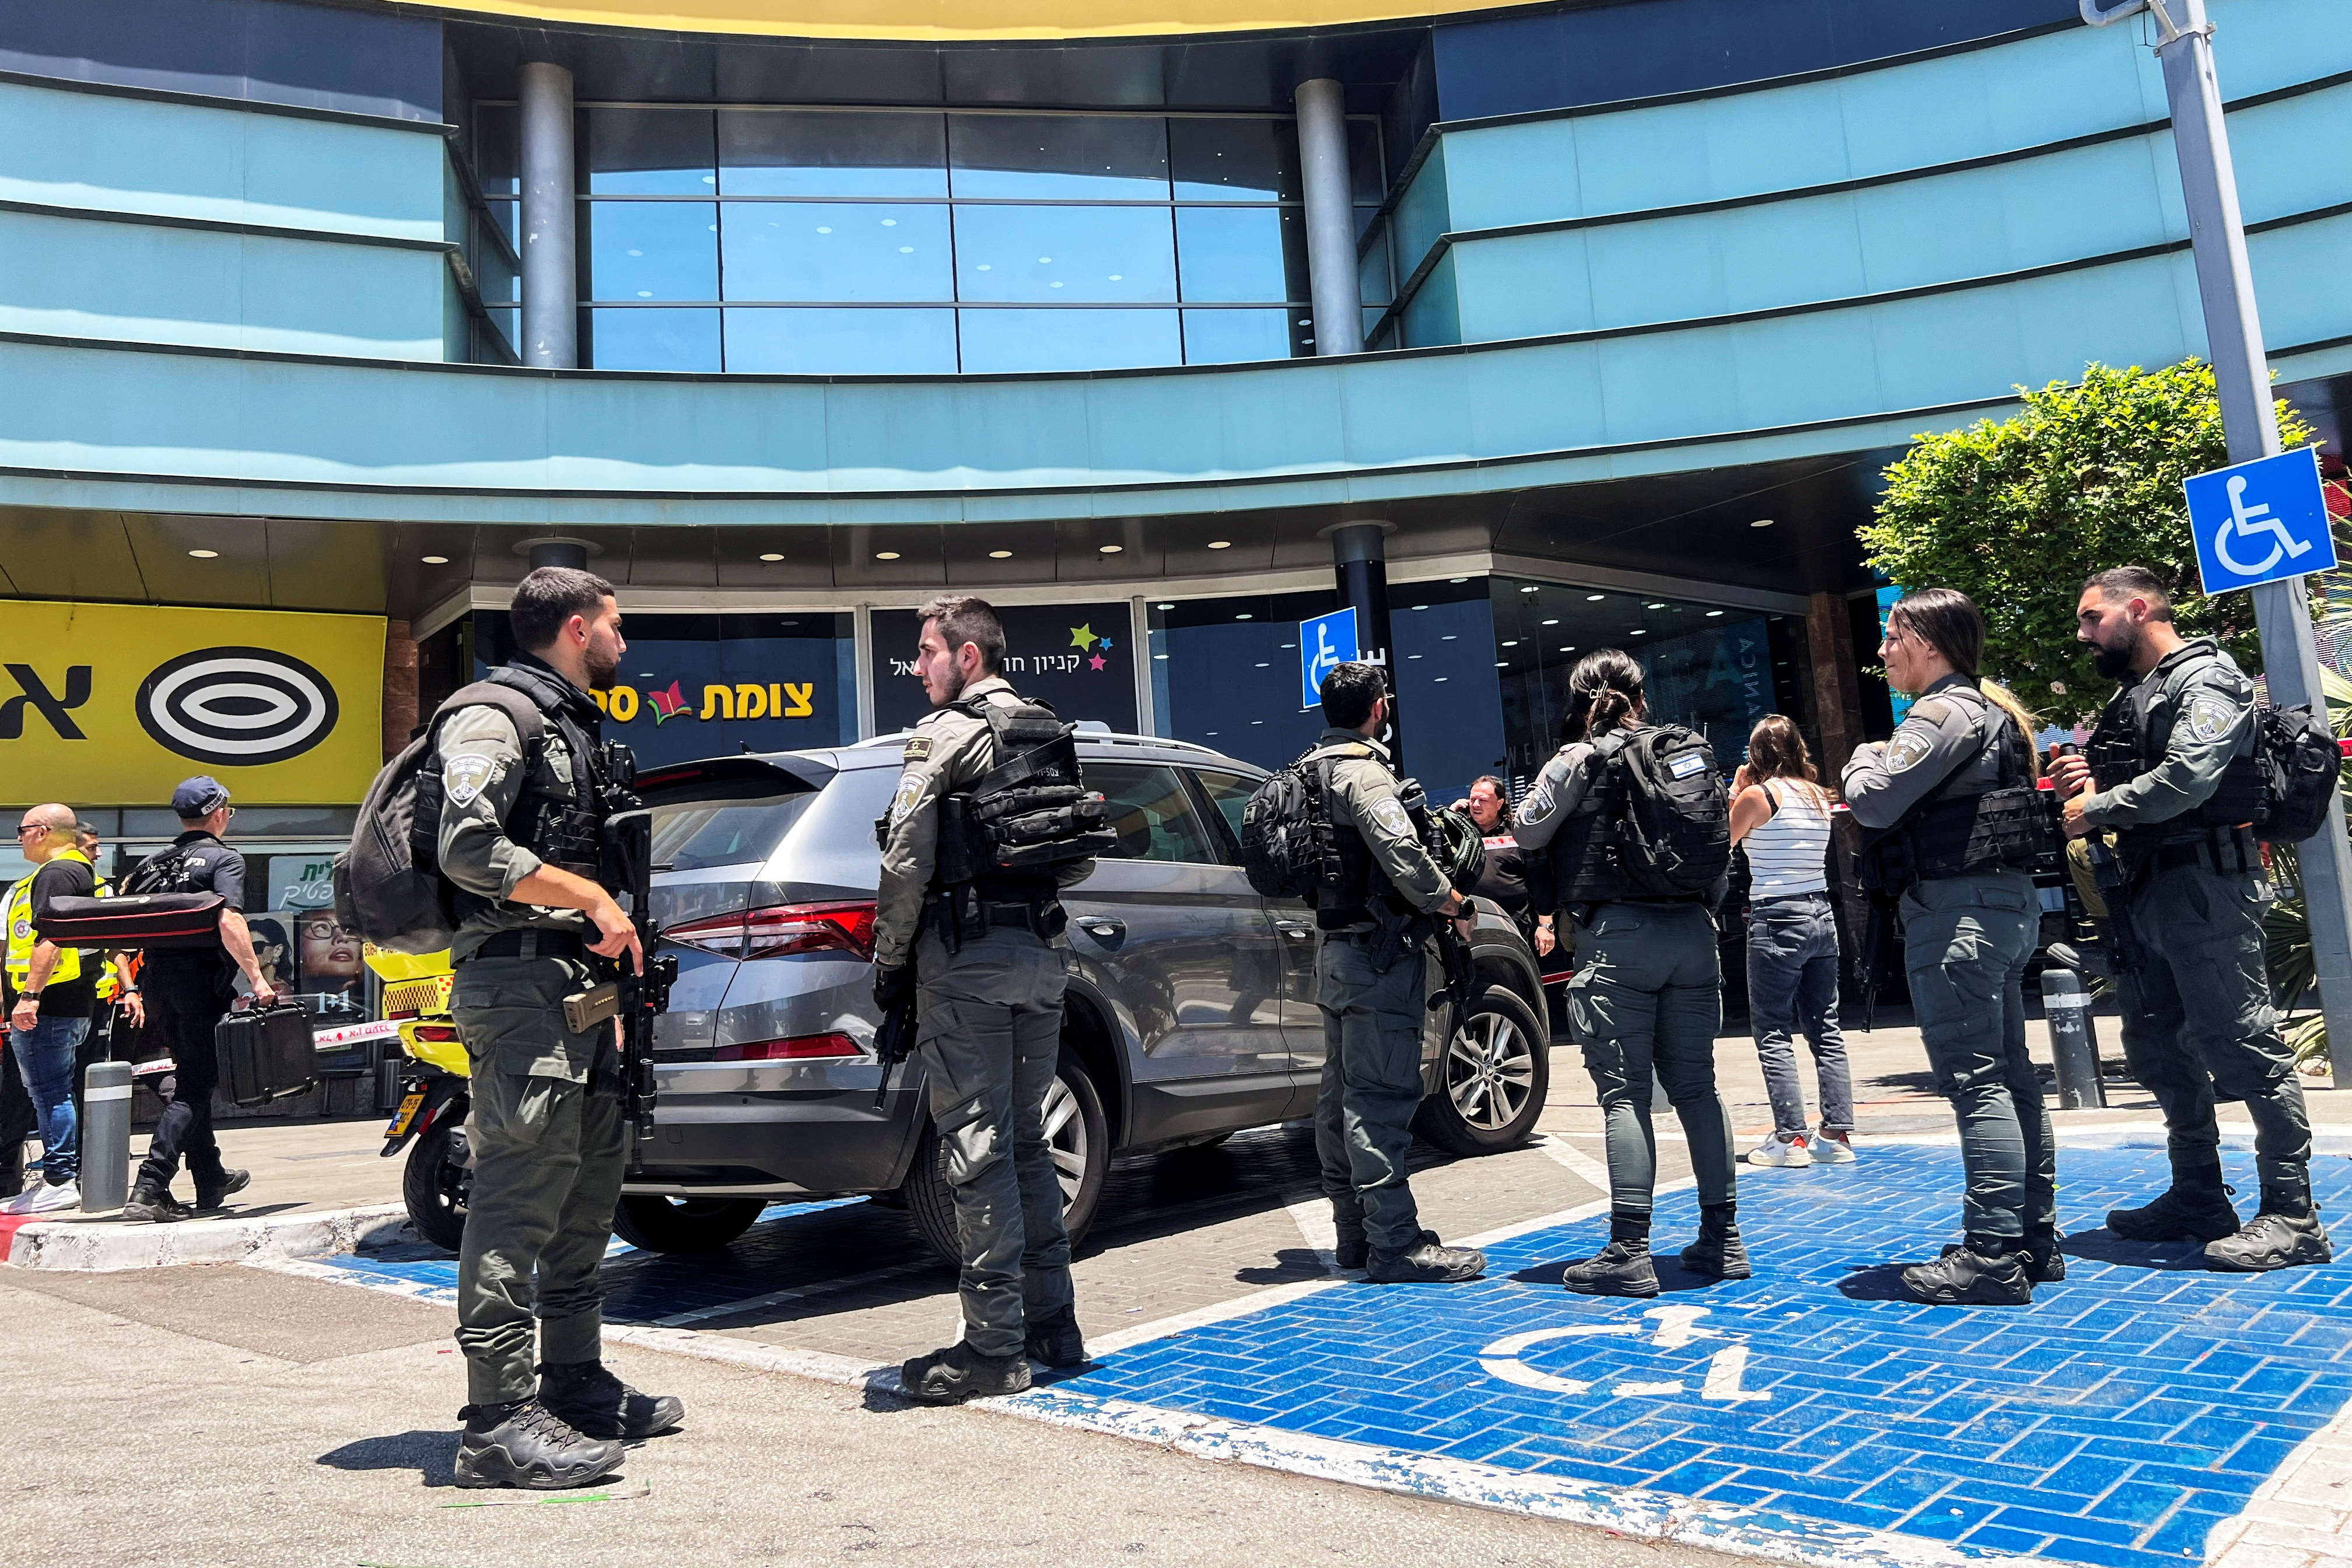 Aftermath of a stabbing attack in a shopping mall in Karmiel, northern Israel